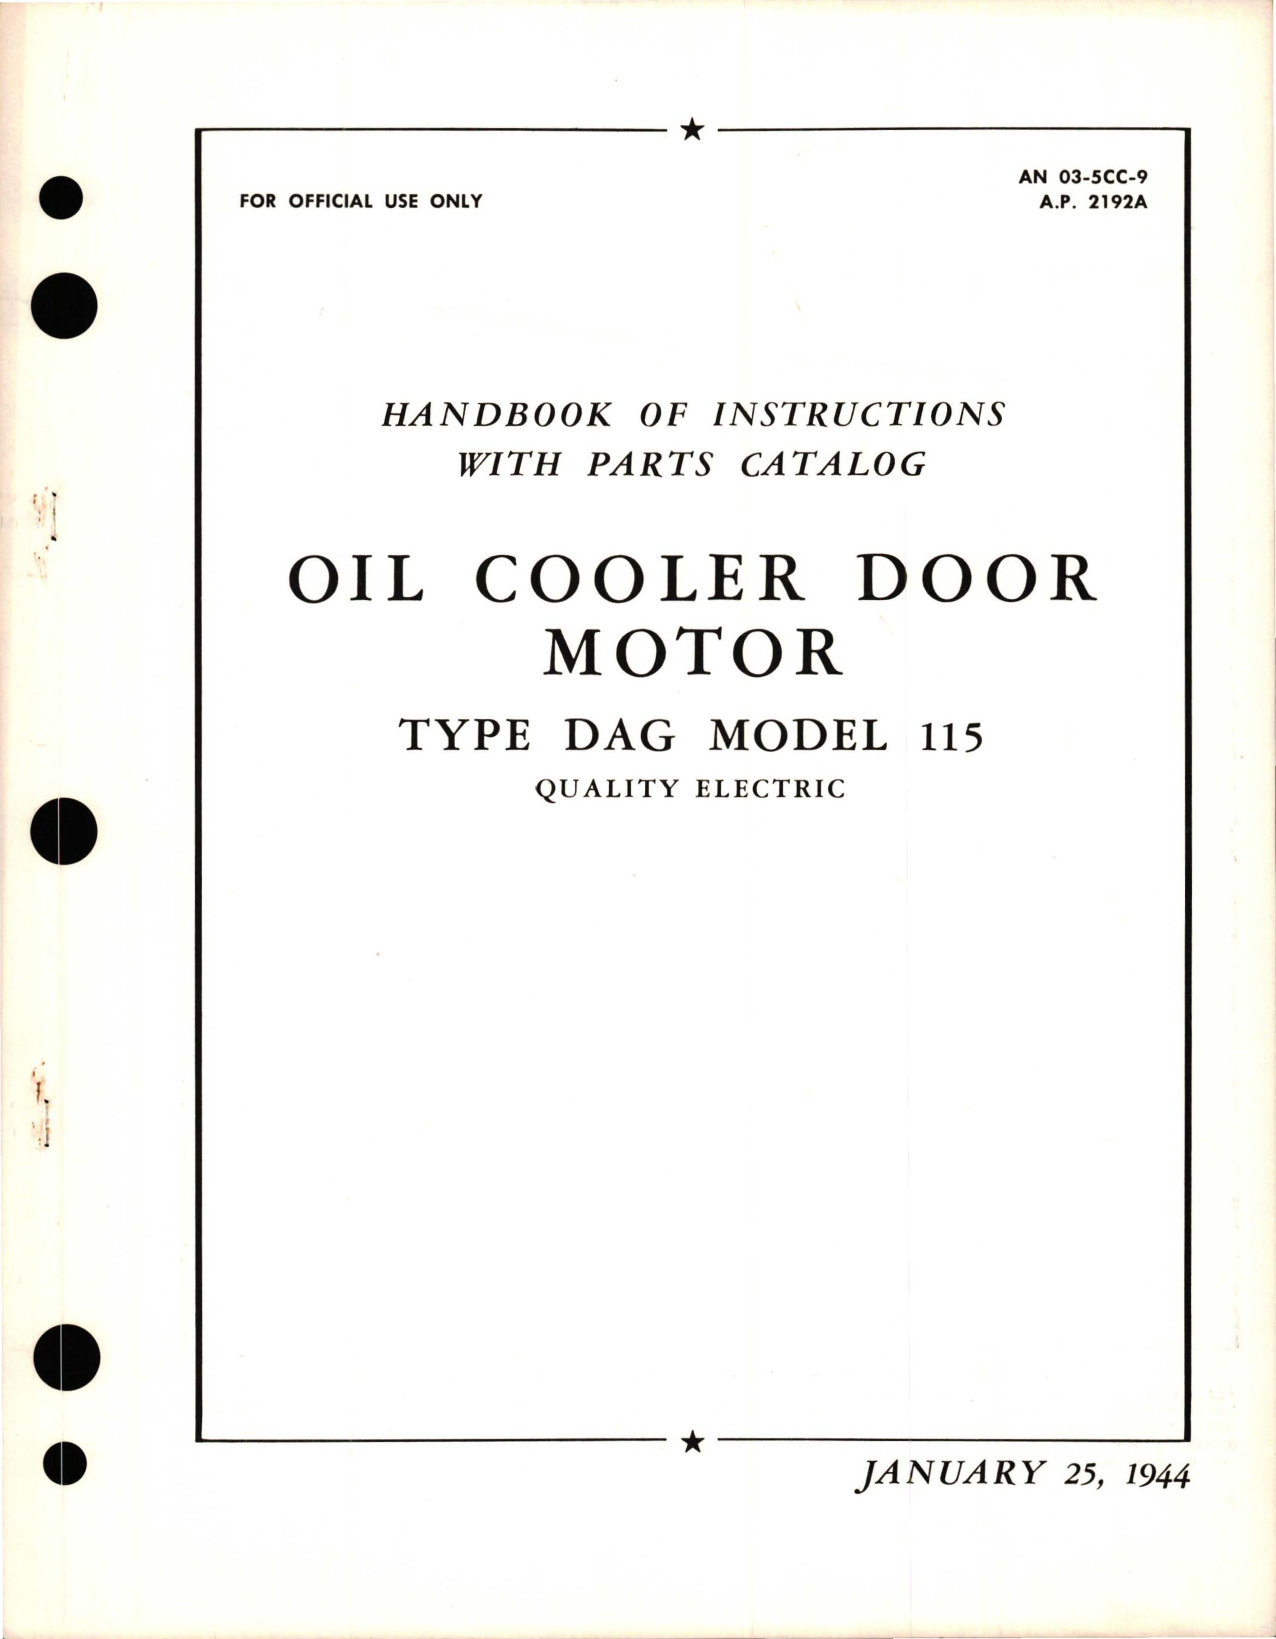 Sample page 1 from AirCorps Library document: Instructions with Parts Catalog for Oil Cooler Door Motor - Type DAG Model 115